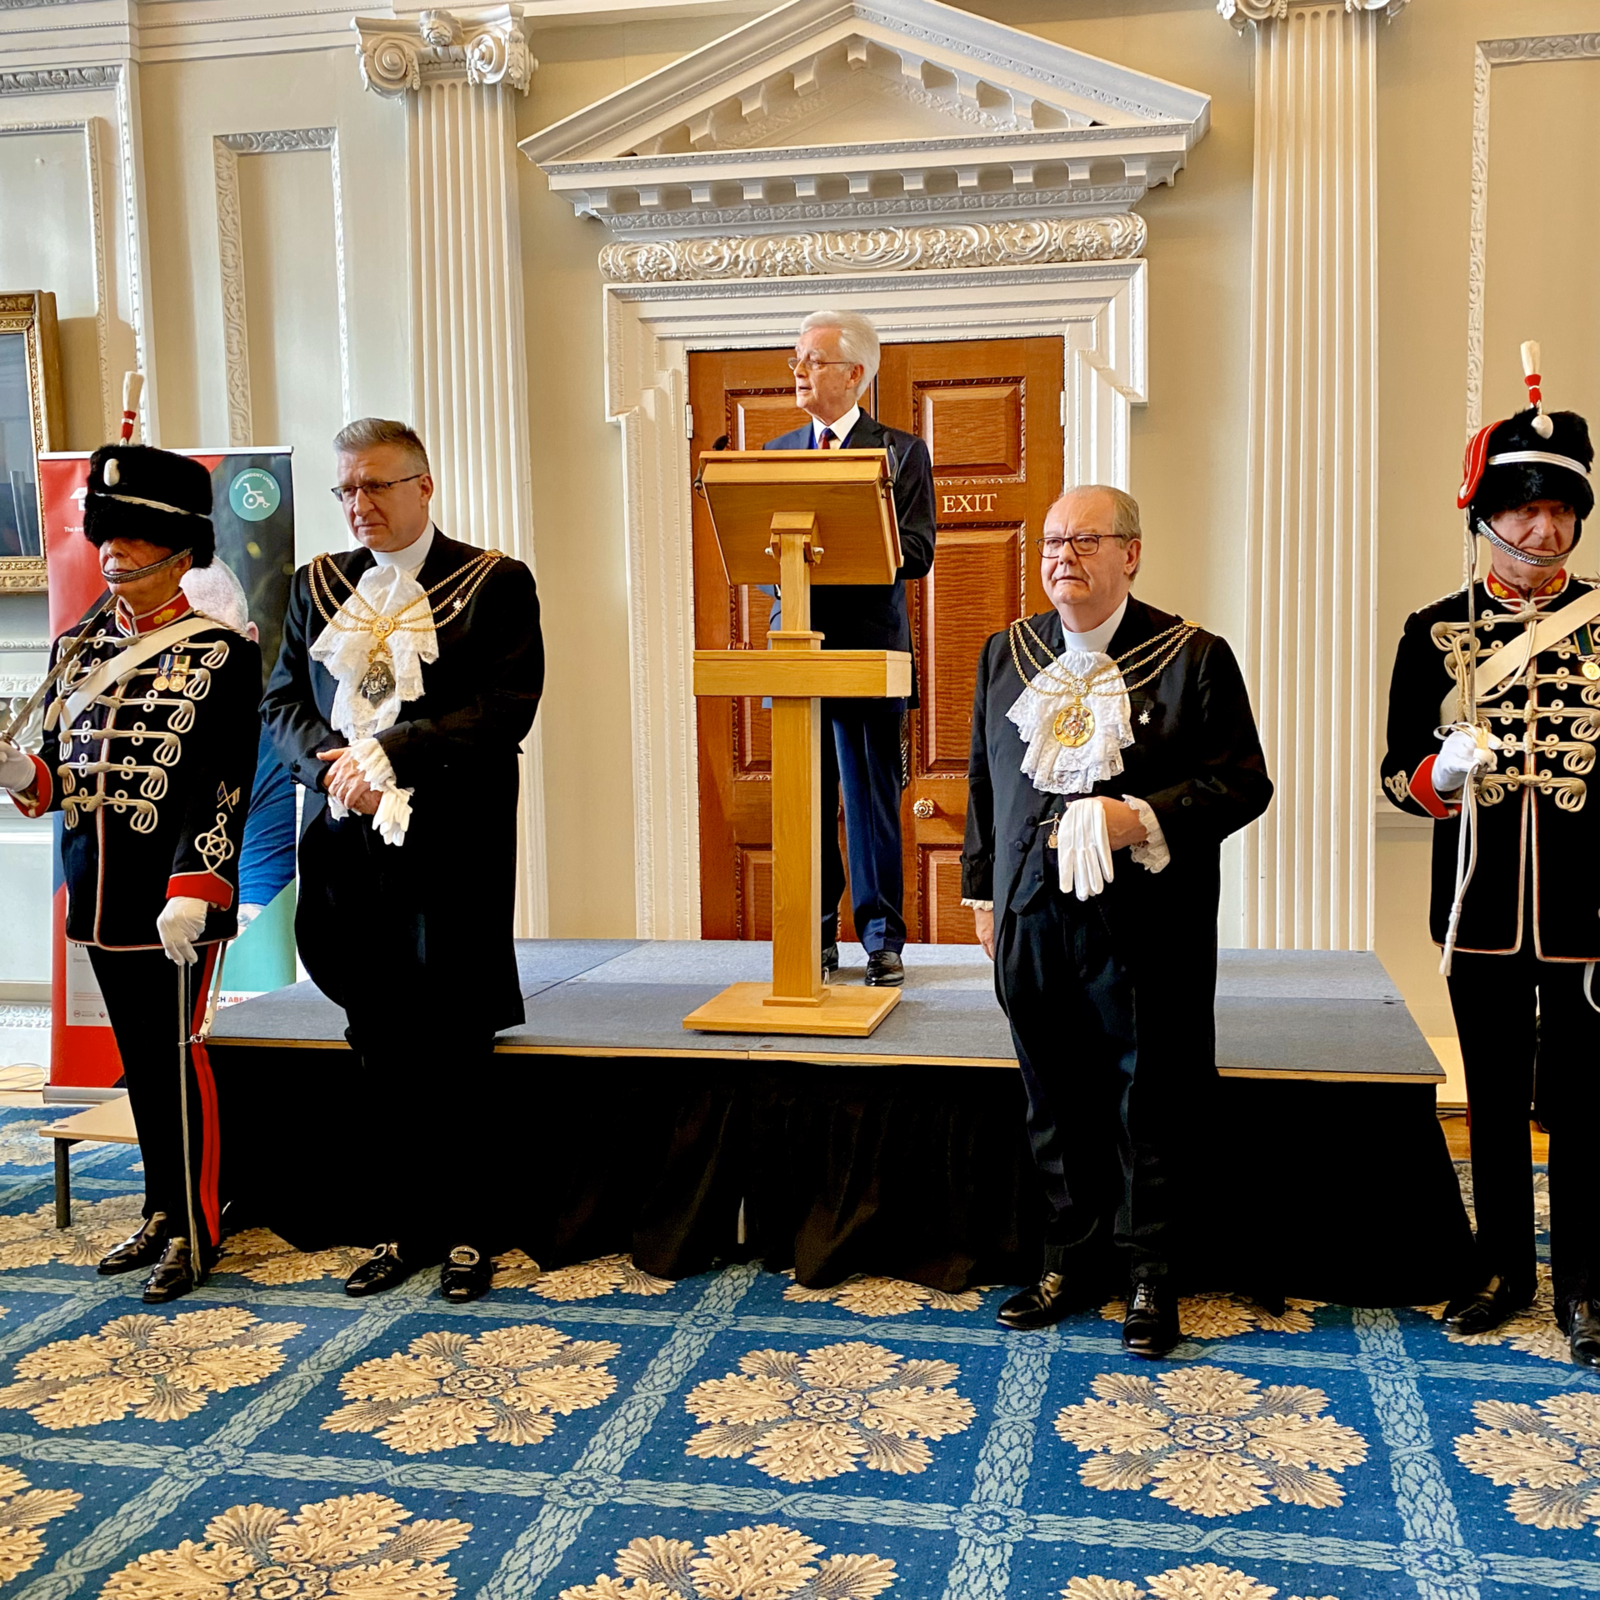 11 May 2023 - The outstanding result of this year’s Big Curry Lunch was announced at the Mansion House by the Lord Mayor.  Not only was the target of raising £325,000 surpassed but, after expenses, under the brilliant leadership of Chair Michael Hockney the team raised the record sum of £435,000! 